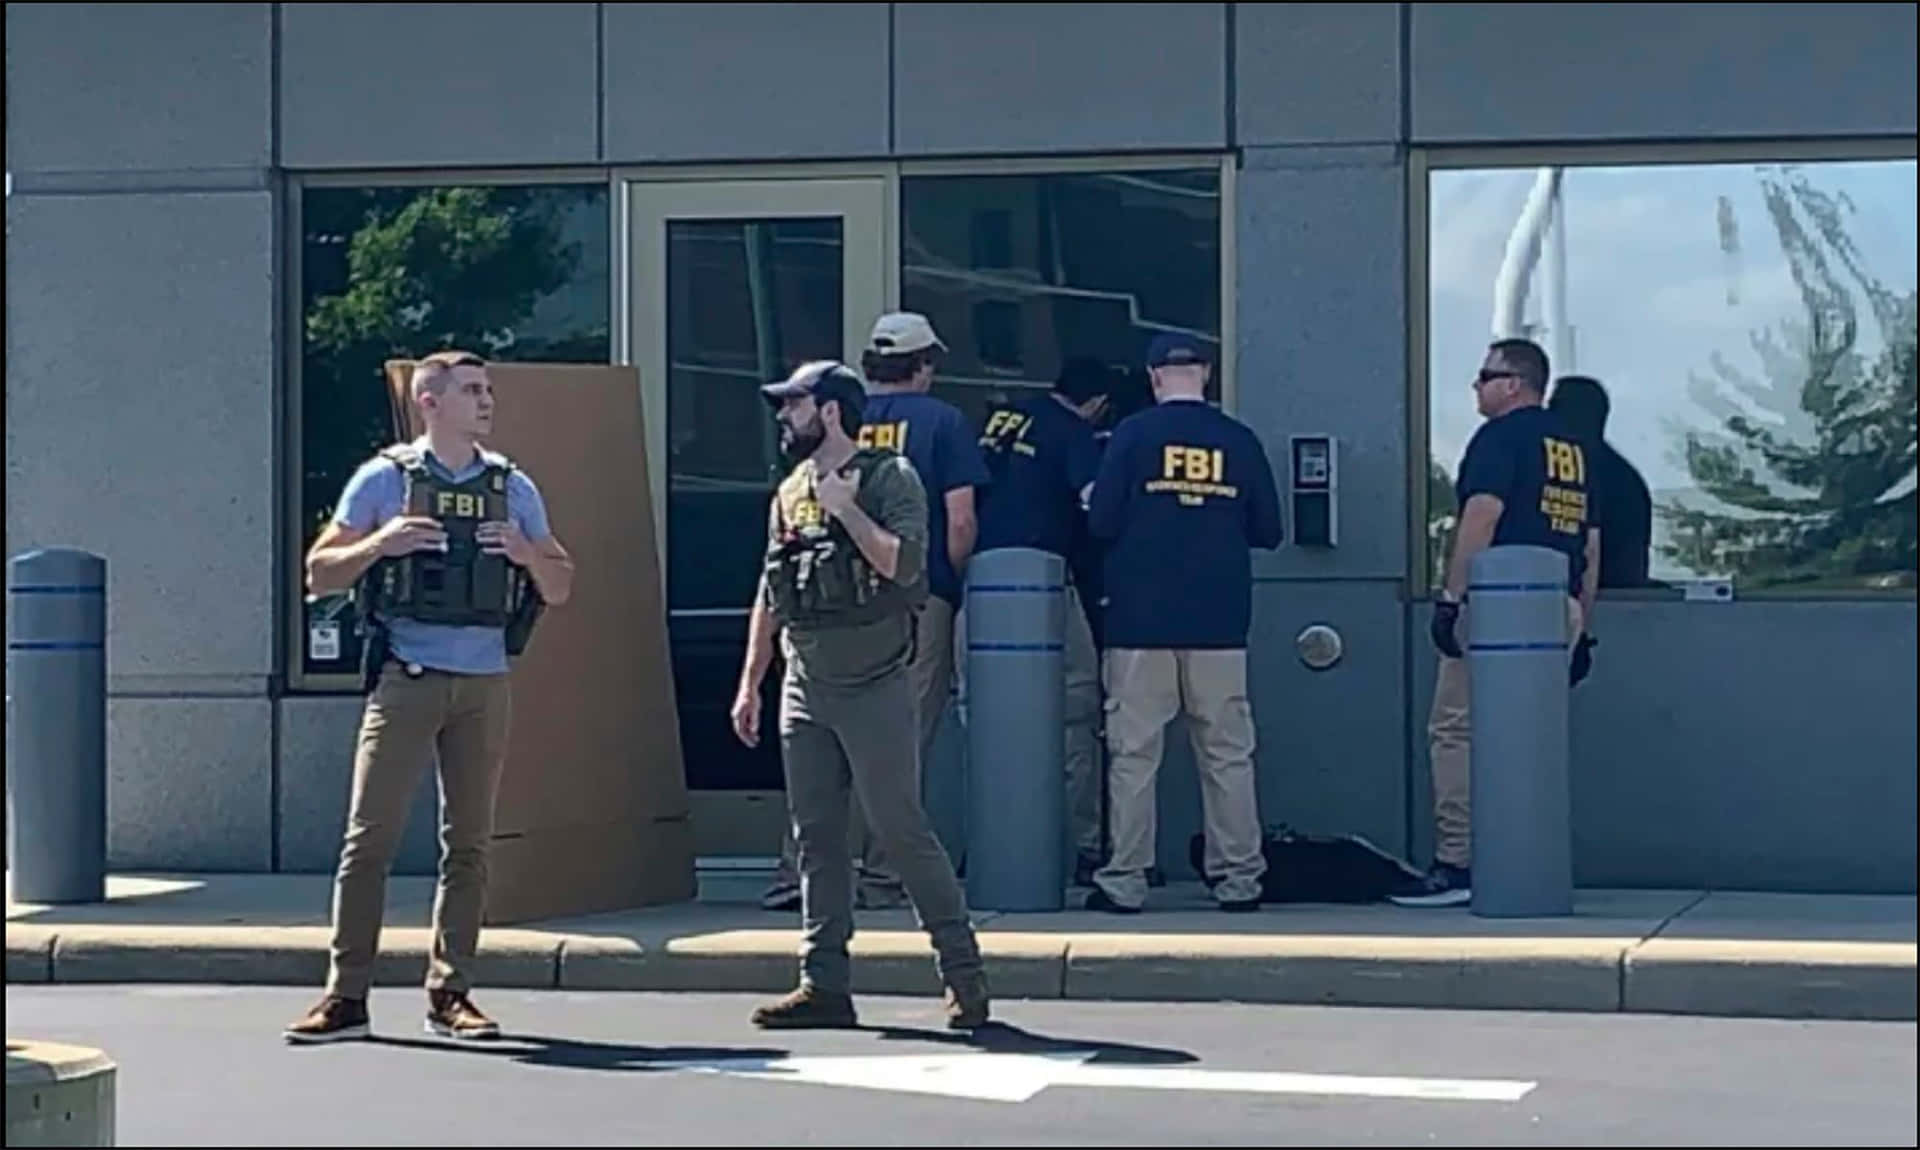 Fbi Agents Stand Outside A Building